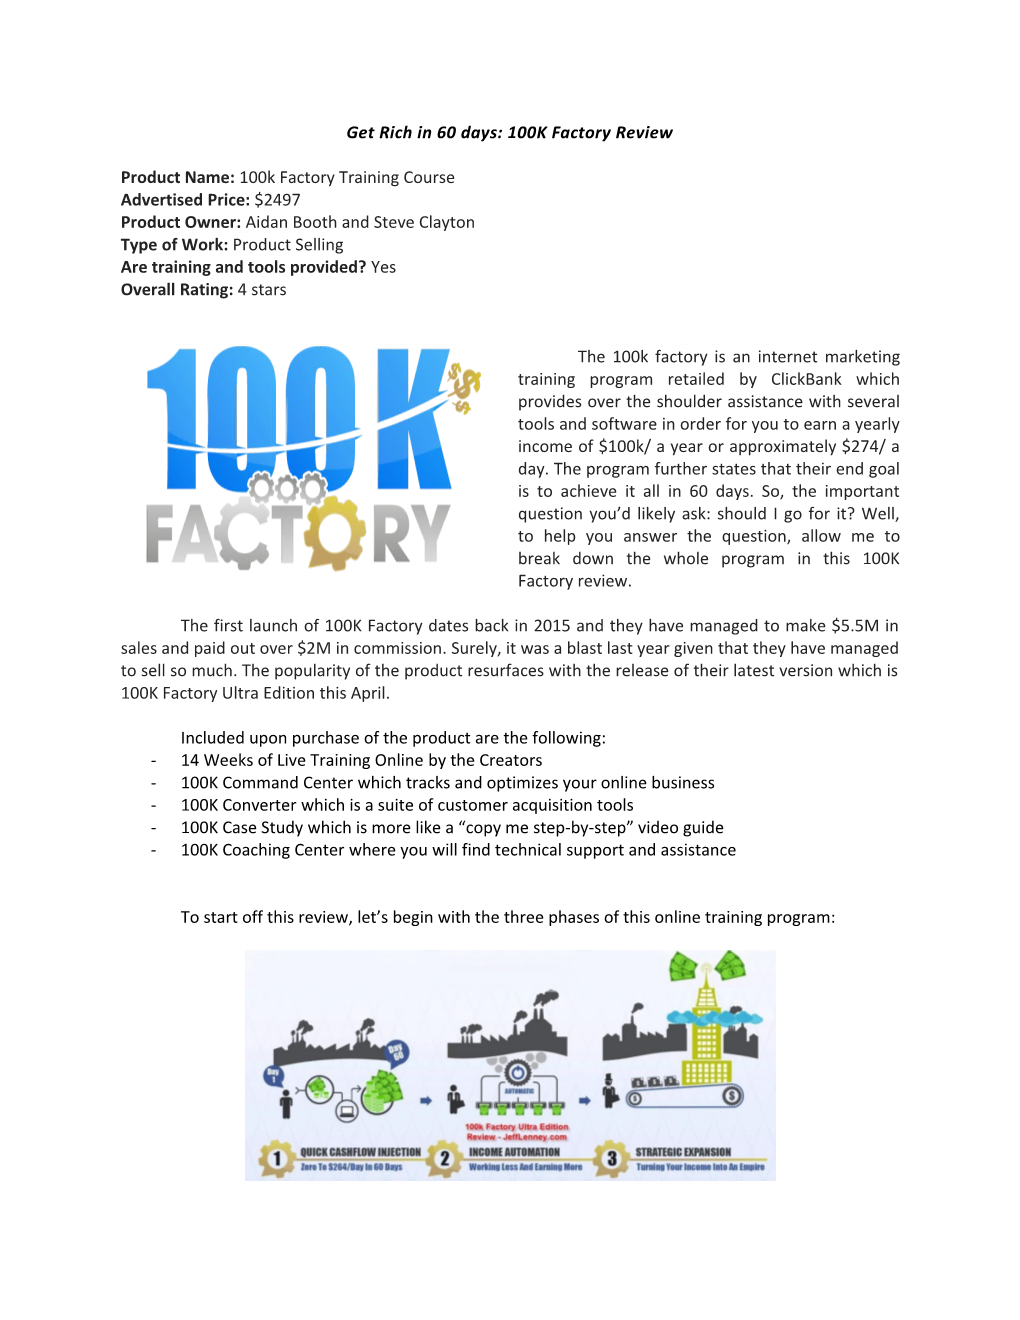 Get Rich in 60 Days: 100K Factory Review